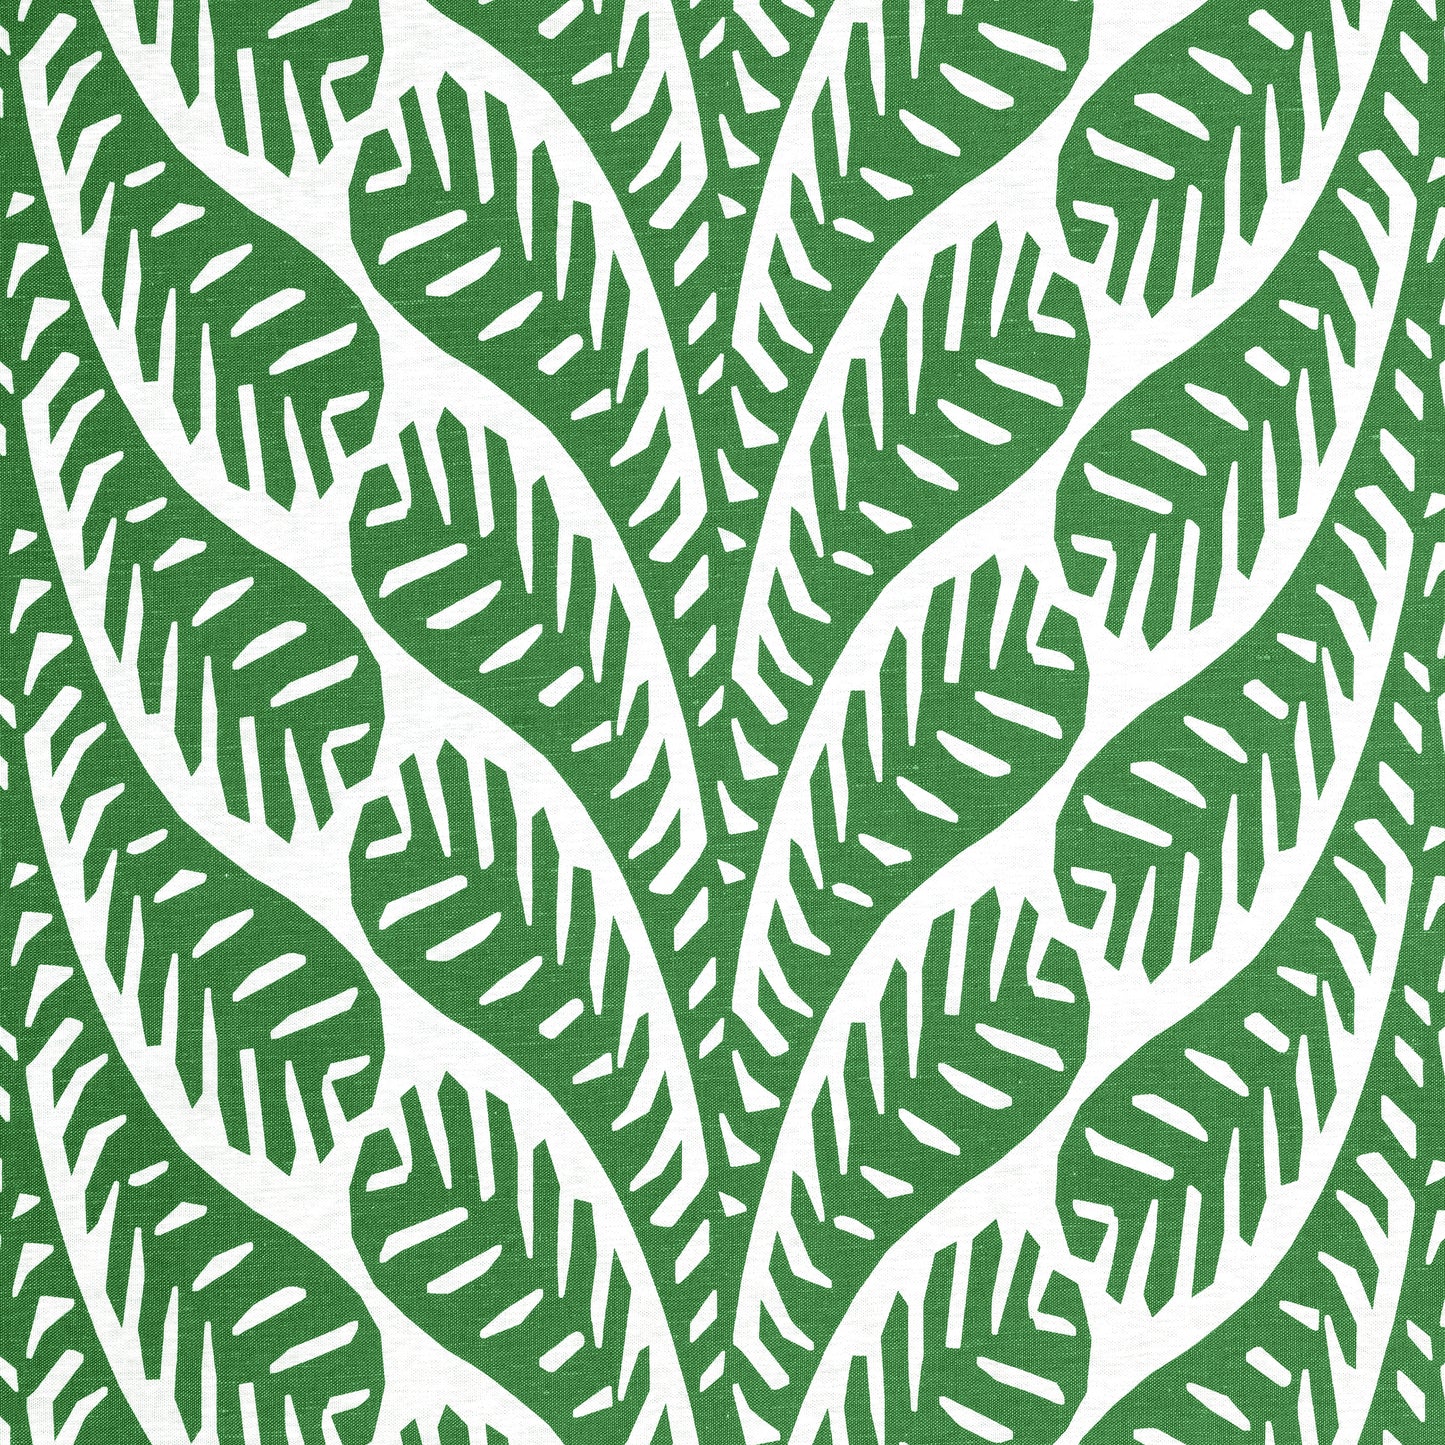 Purchase Thibaut Fabric Product F920832 pattern name Ginger color Green